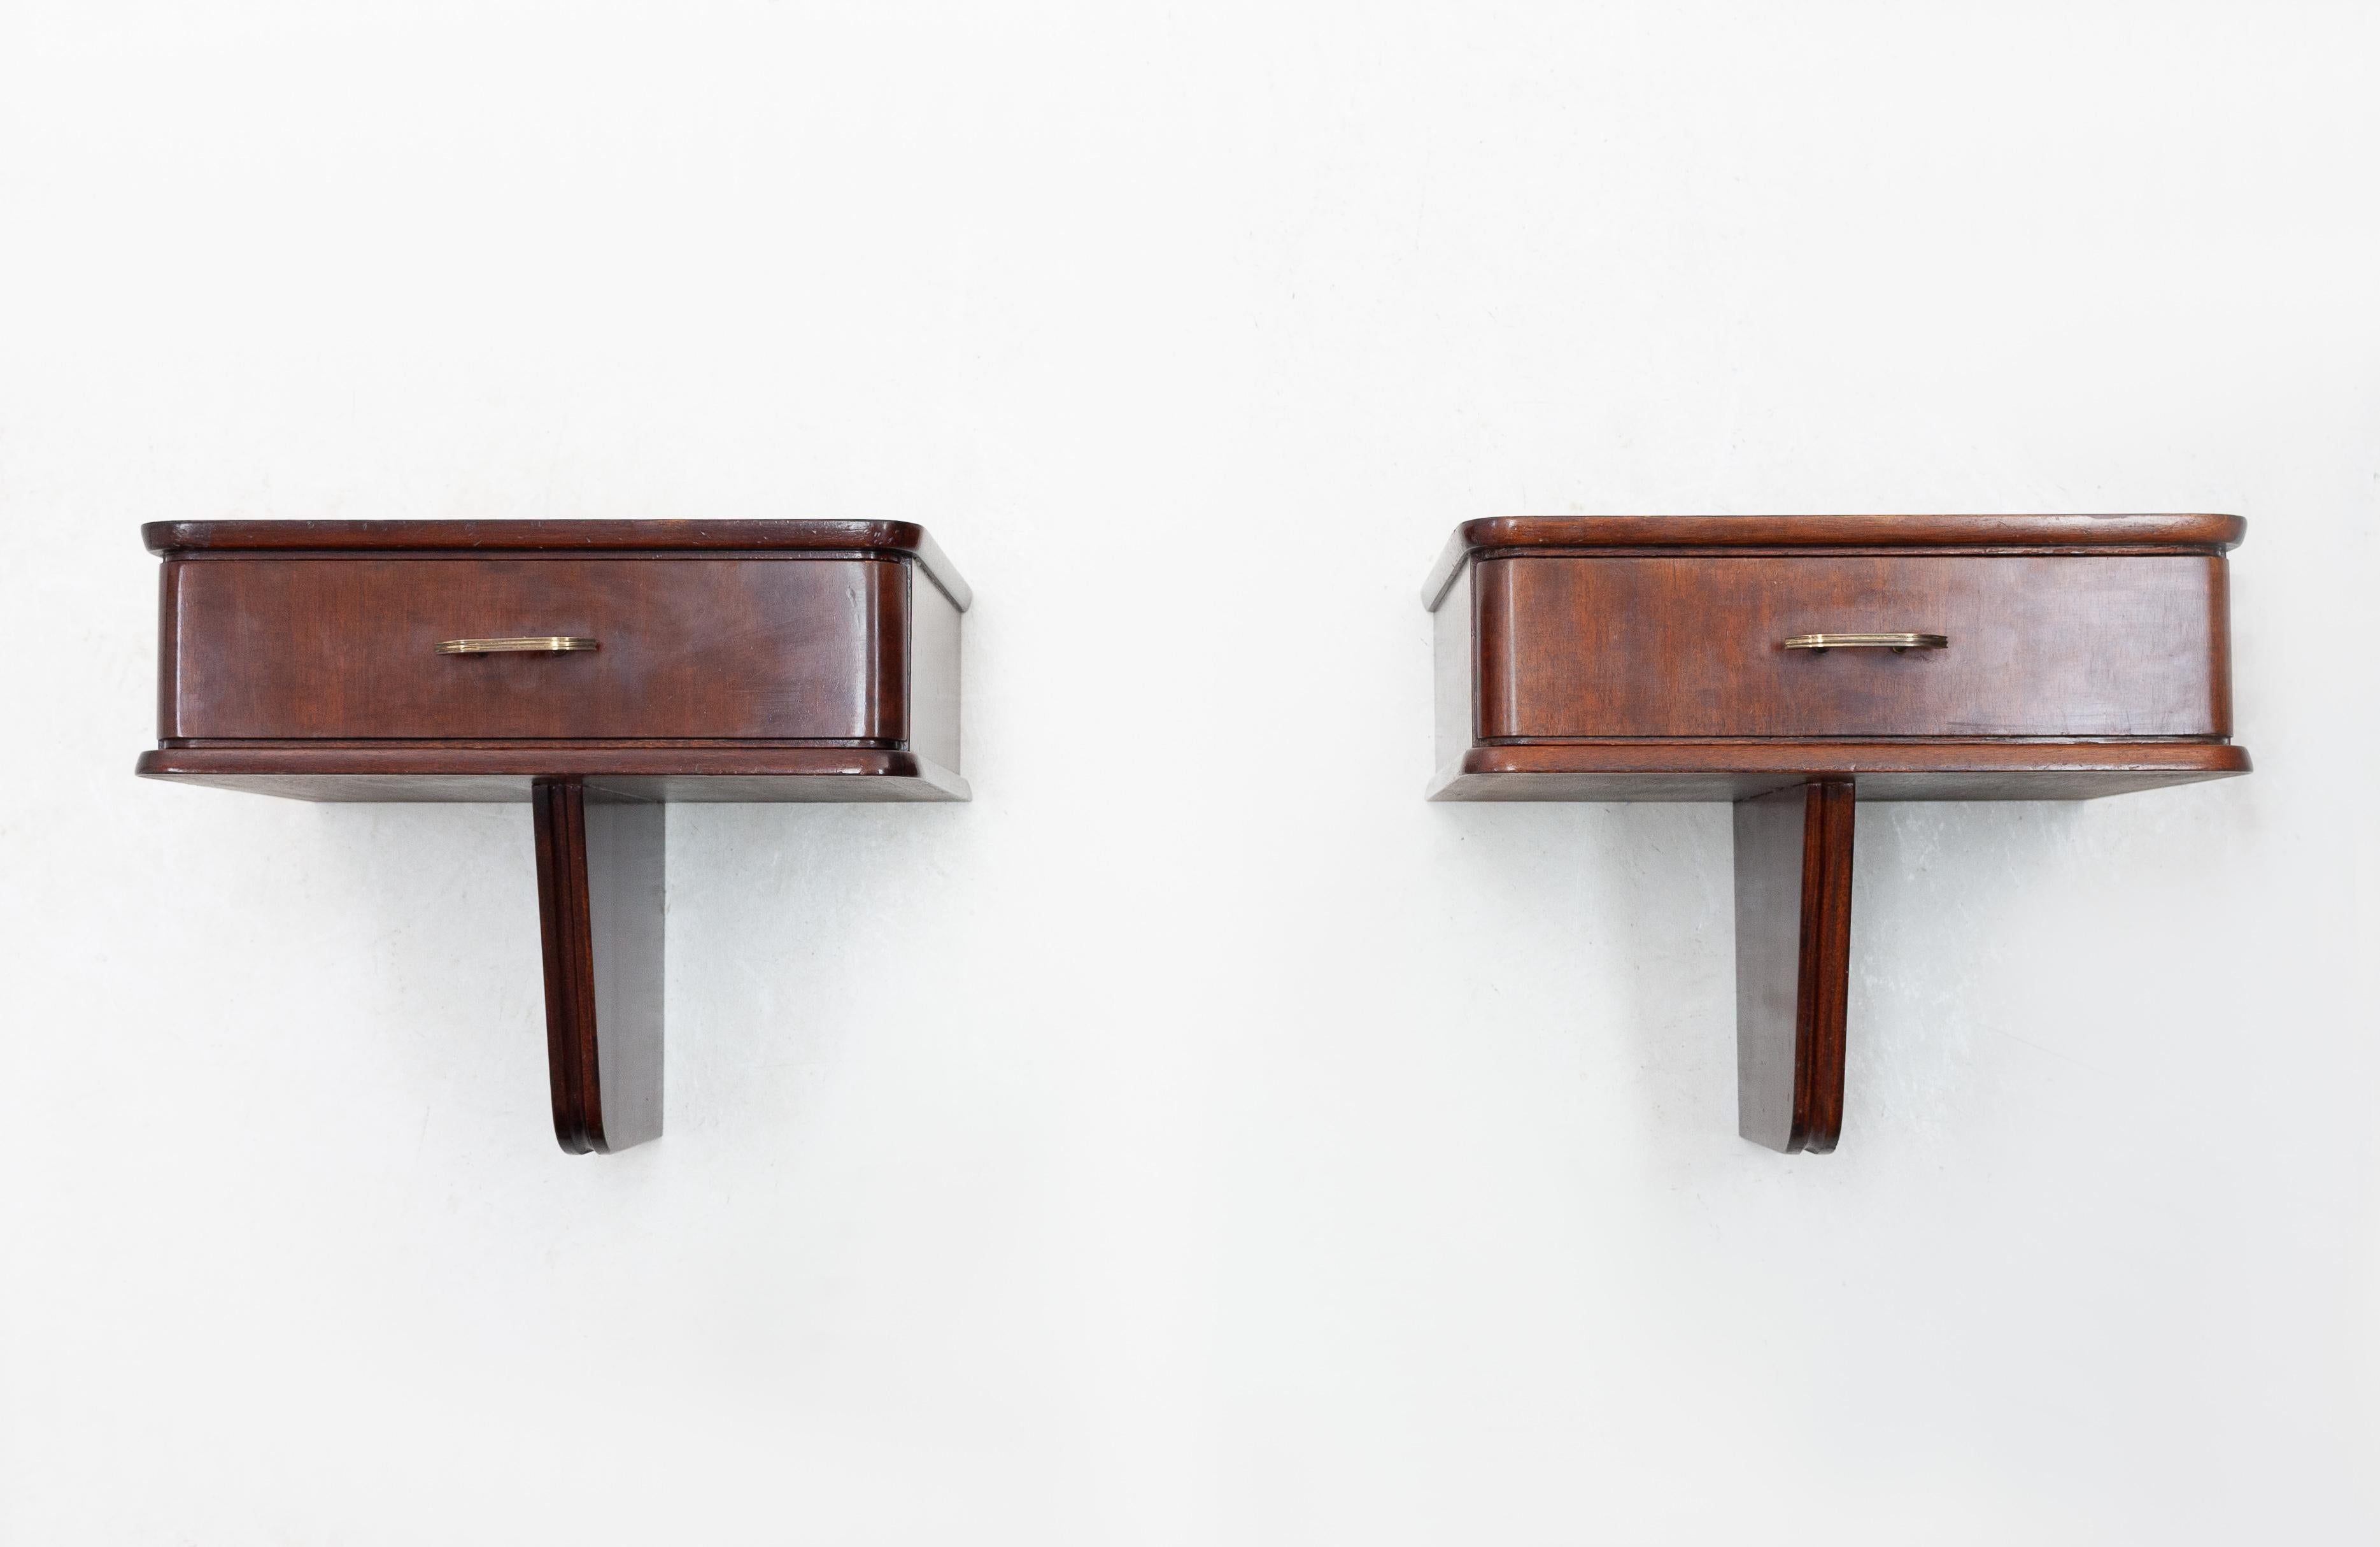 Two floating nightstands from the 1950s. Designed by Dutch architect and furniture maker Abraham A. Patijn. These floating night stands are a very nice example of his work and feature all curved and rounded corners.